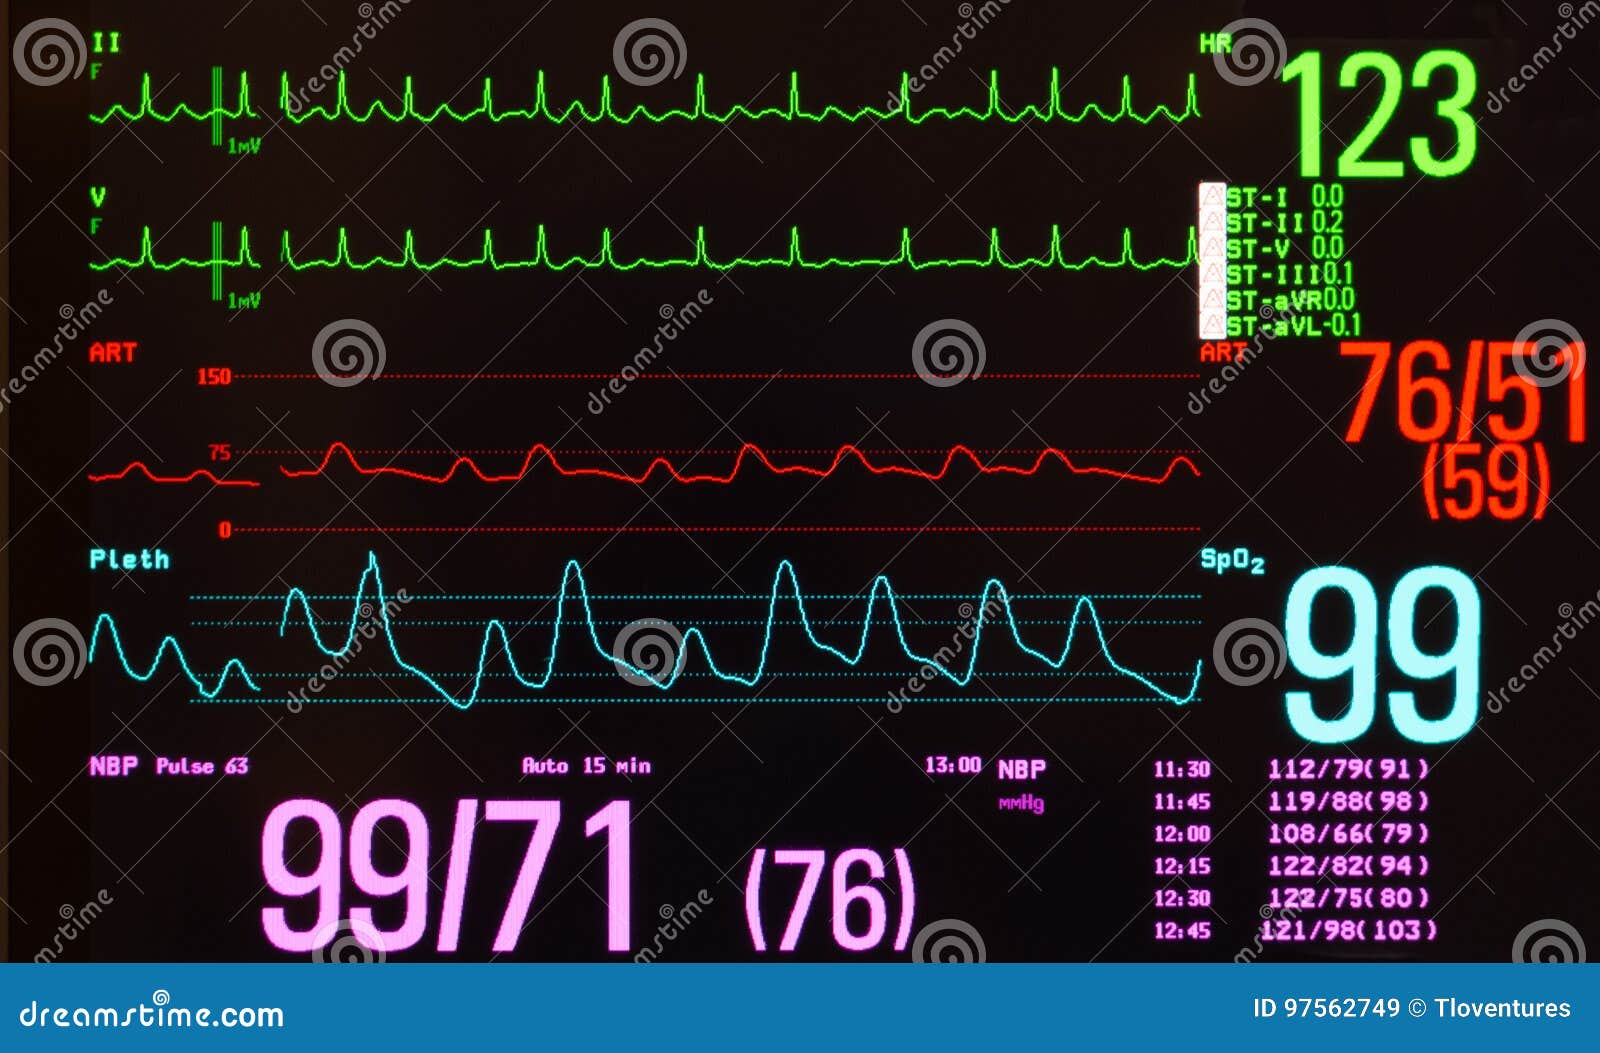 monitor with atrial flutter